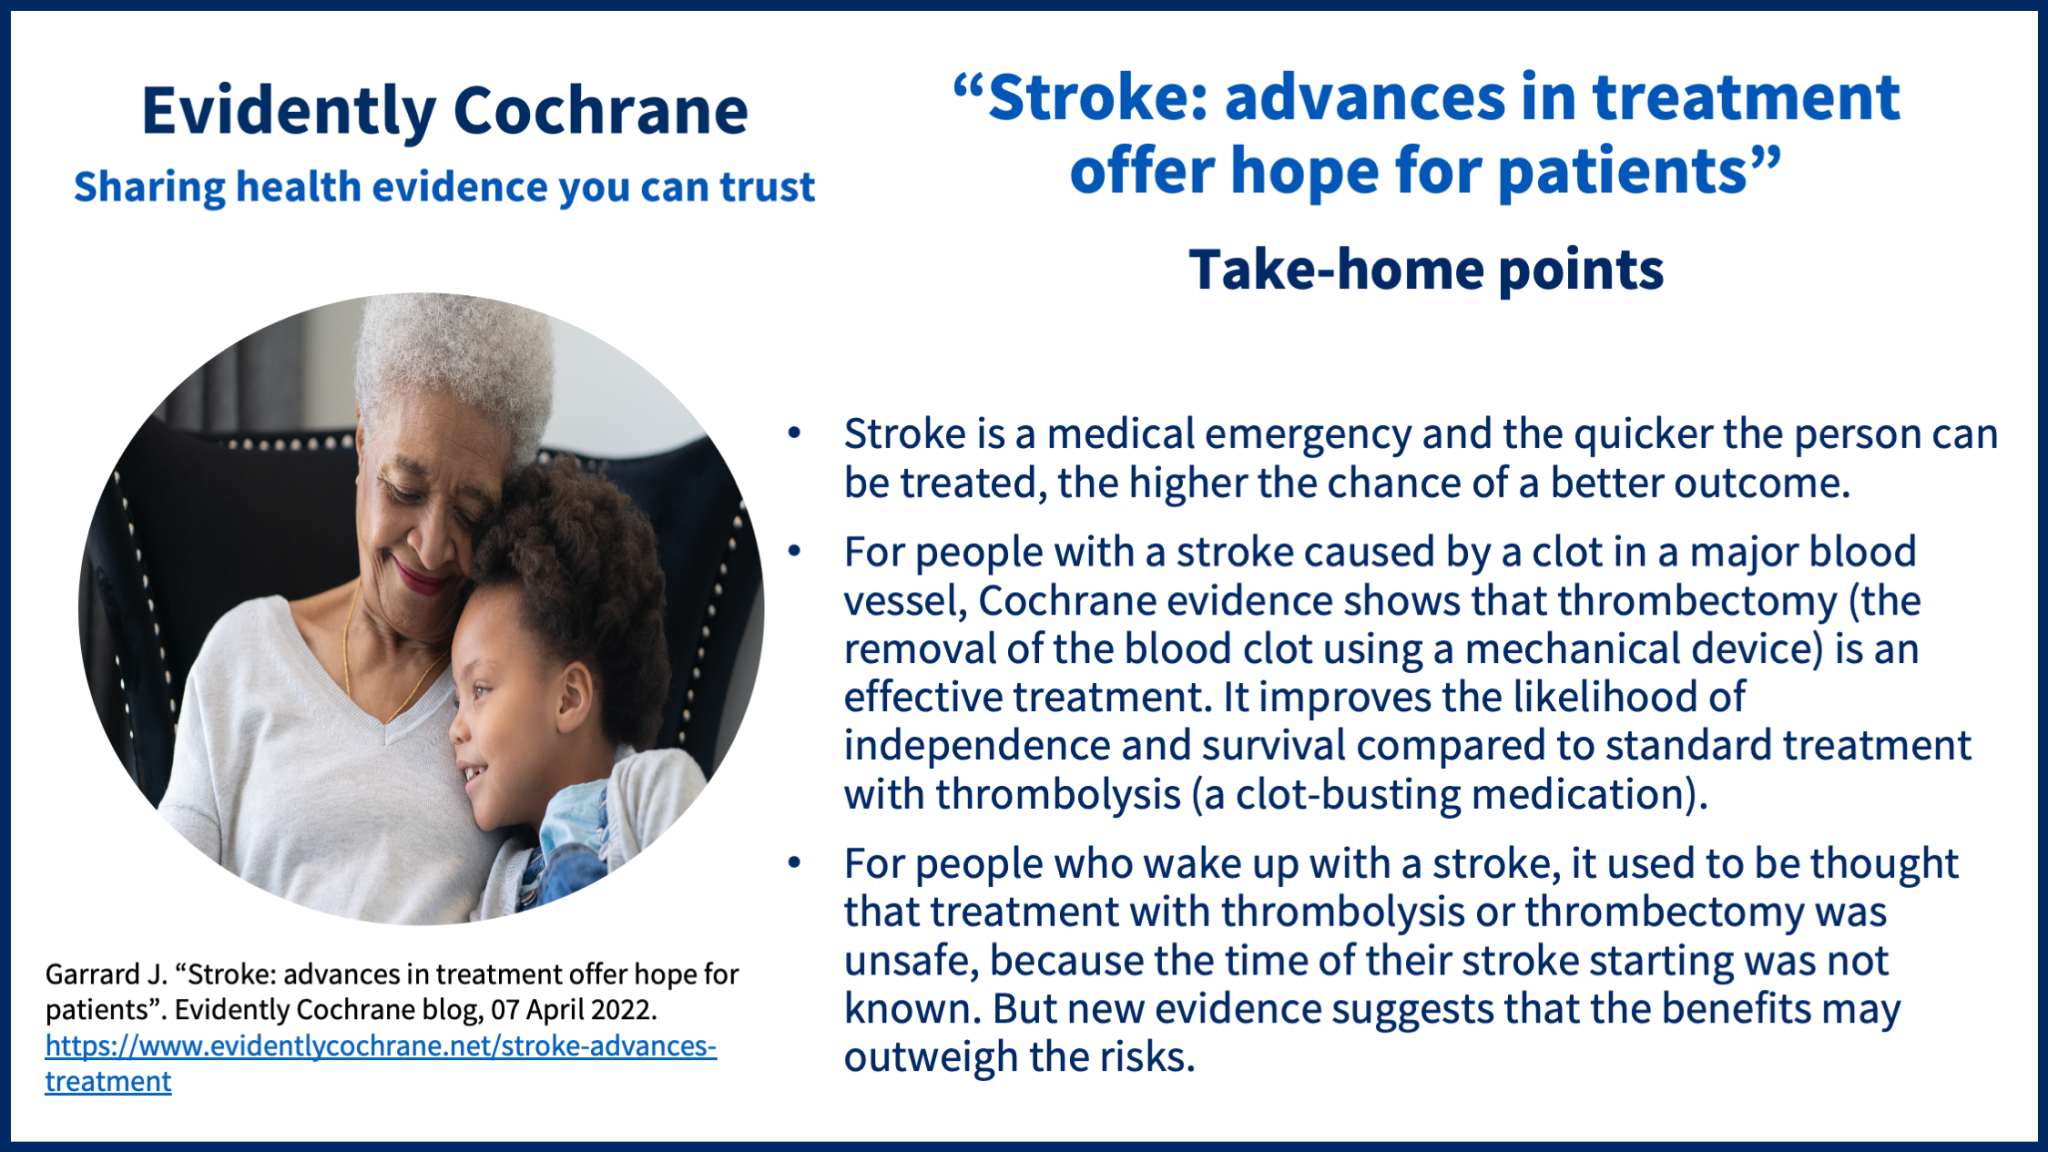 Take-home points: Stroke is a medical emergency and the quicker the person can be treated, the higher the chance of a better outcome. For people with a stroke caused by a clot in a major blood vessel, Cochrane evidence shows that thrombectomy (the removal of the blood clot using a mechanical device) is an effective treatment. It improves the likelihood of independence and survival compared to standard treatment with thrombolysis (a clot-busting medication). For people who wake up with a stroke, it used to be thought that treatment with thrombolysis or thrombectomy was unsafe, because the time of their stroke starting was not known. But new evidence suggests that the benefits may outweigh the risks.